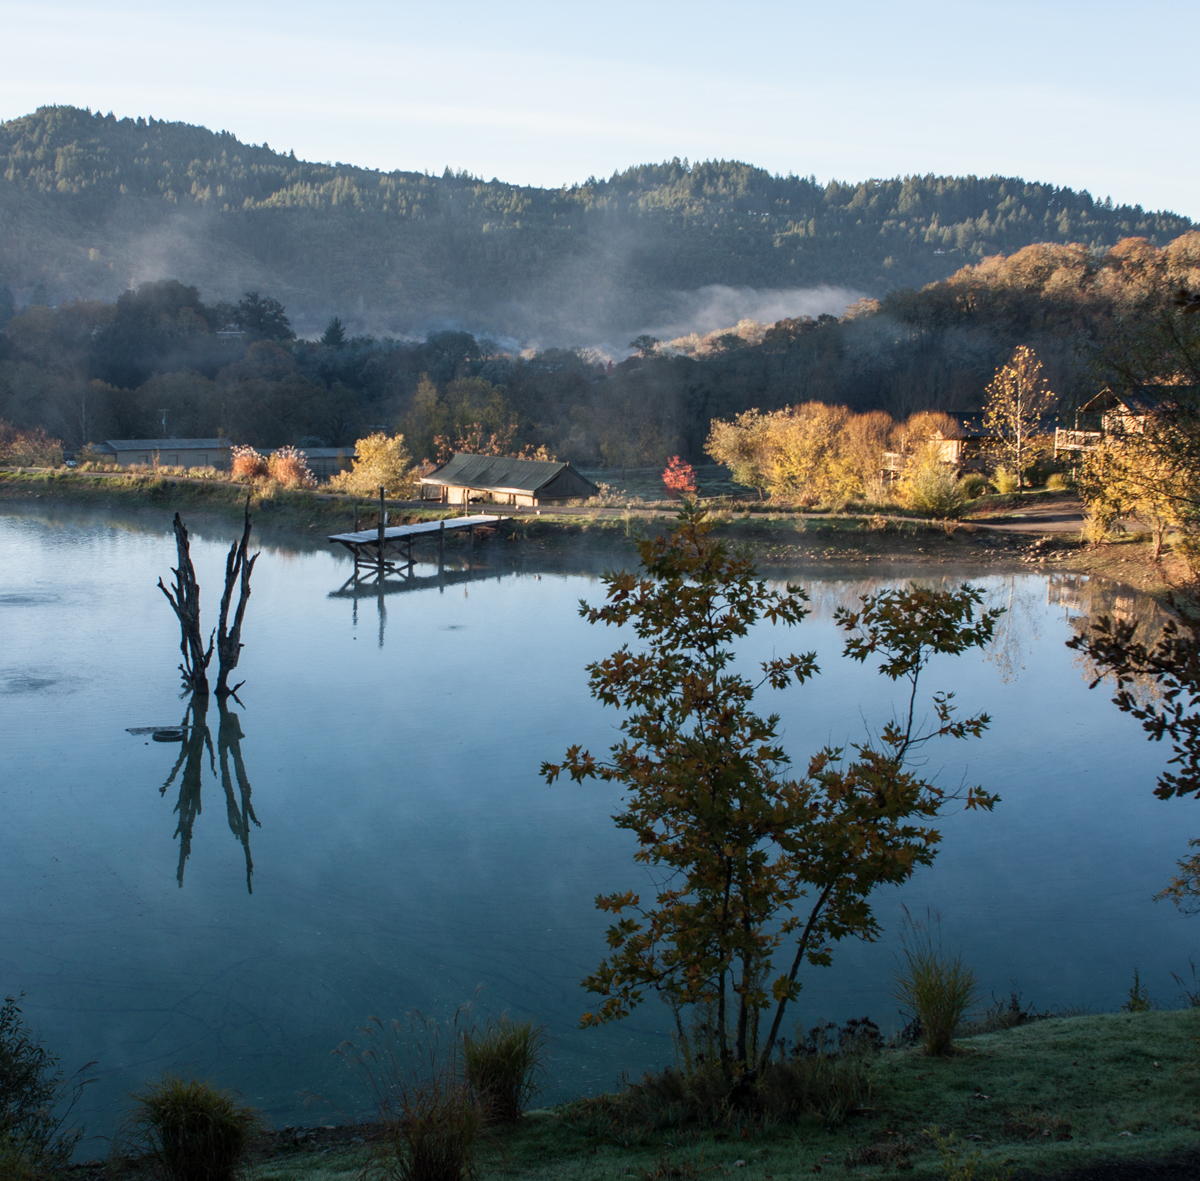 morning mist over lake and autumn trees at safari west, sonoma county, california